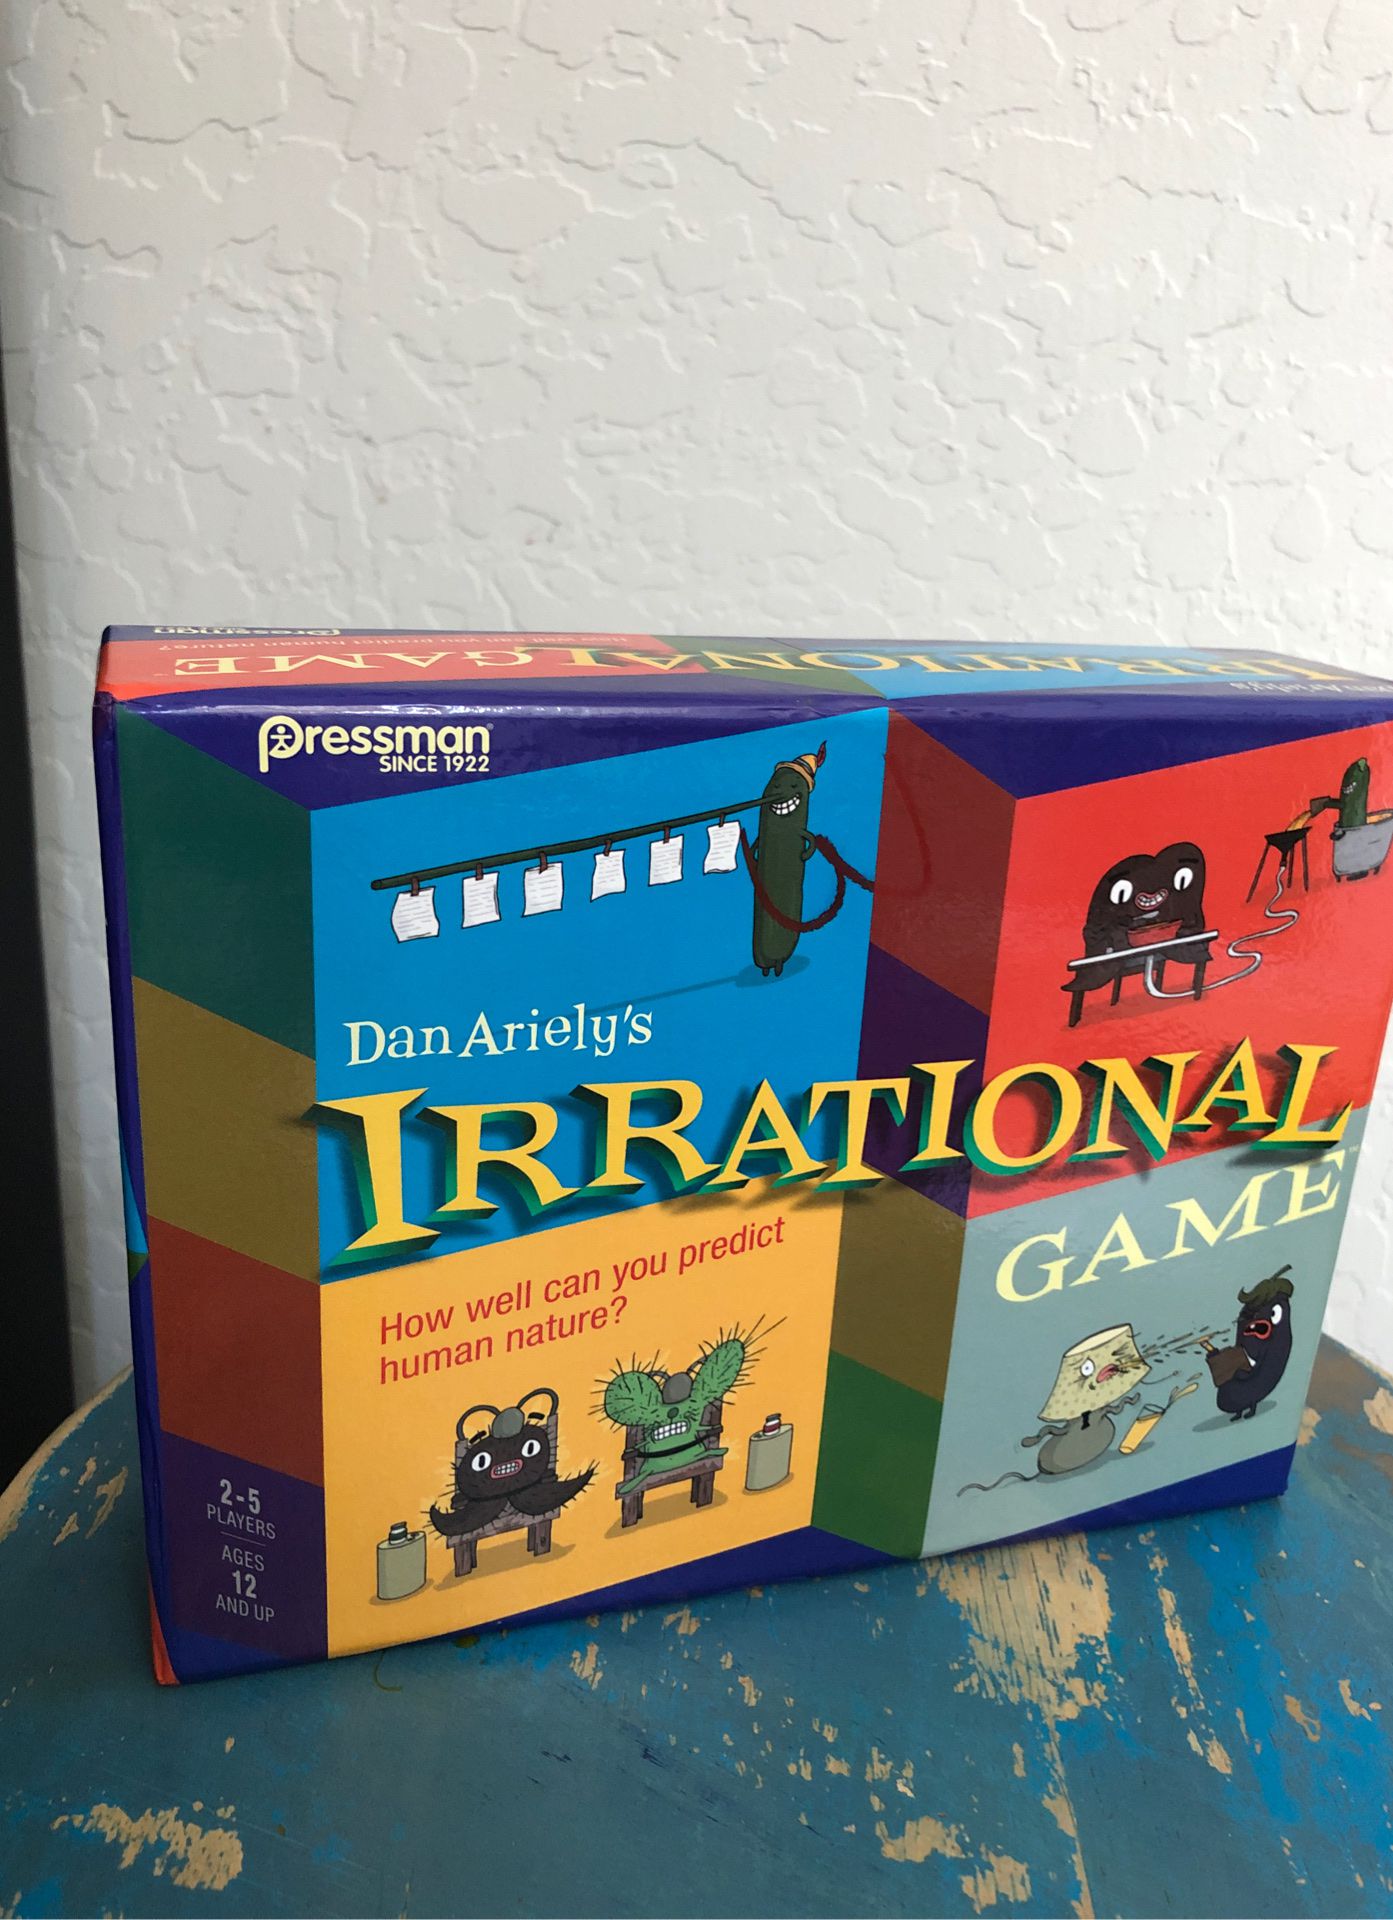 New Irrational game - 2 to 5 players. Ages 12 and up